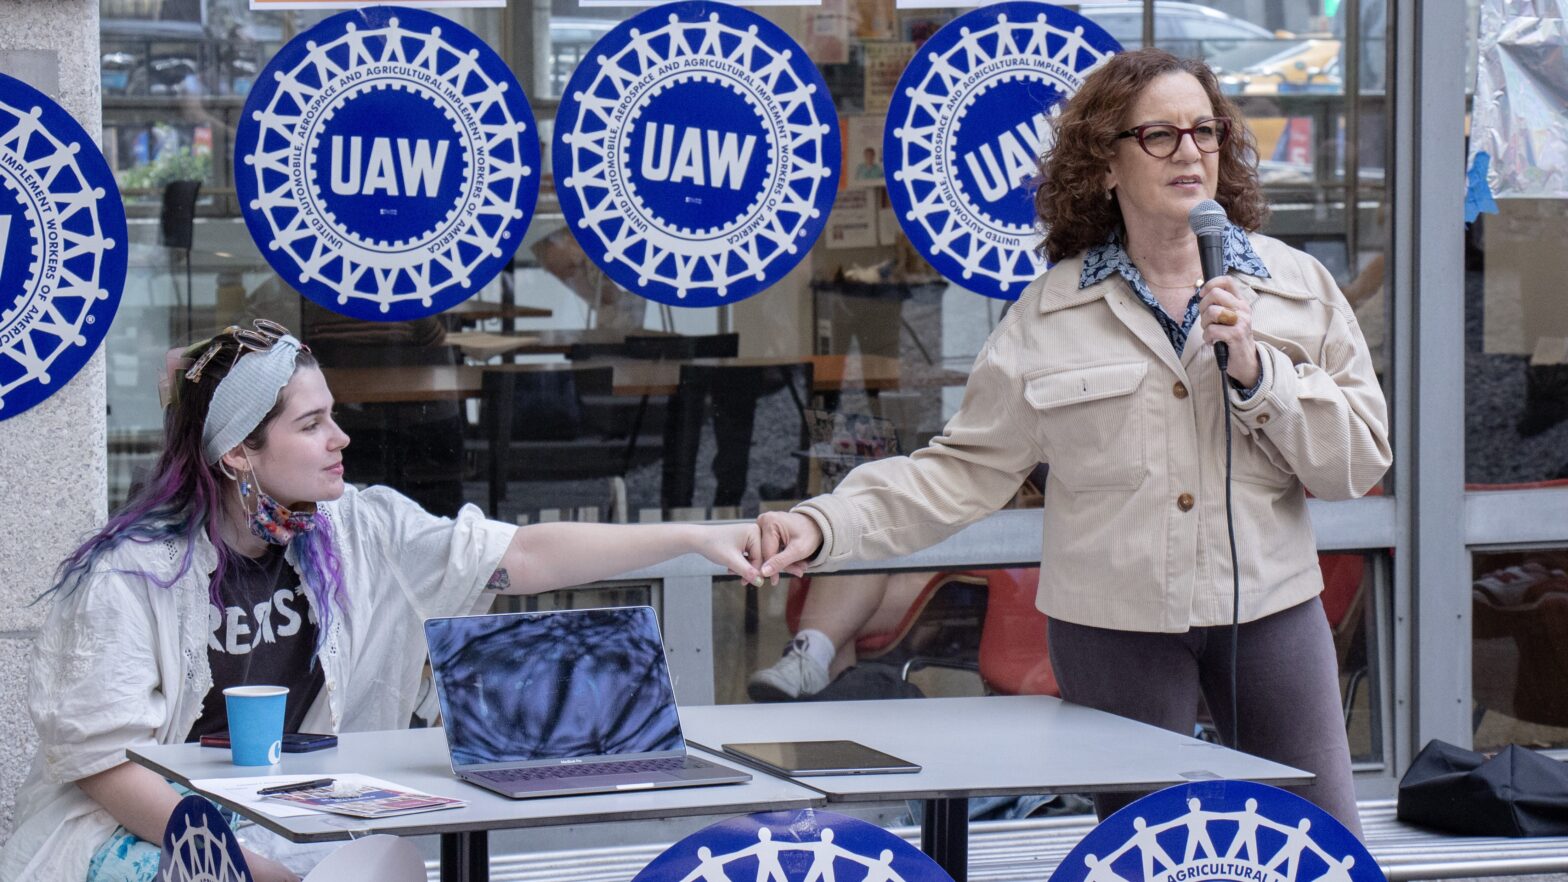 Alt Text: Behind a table, two people fist bump. One is sitting and is wearing a white jacket and bandana. The other is standing and speaking into a microphone. Behind them are four blue and white UAW union signs and orange, teal, and purple signs with QR codes.